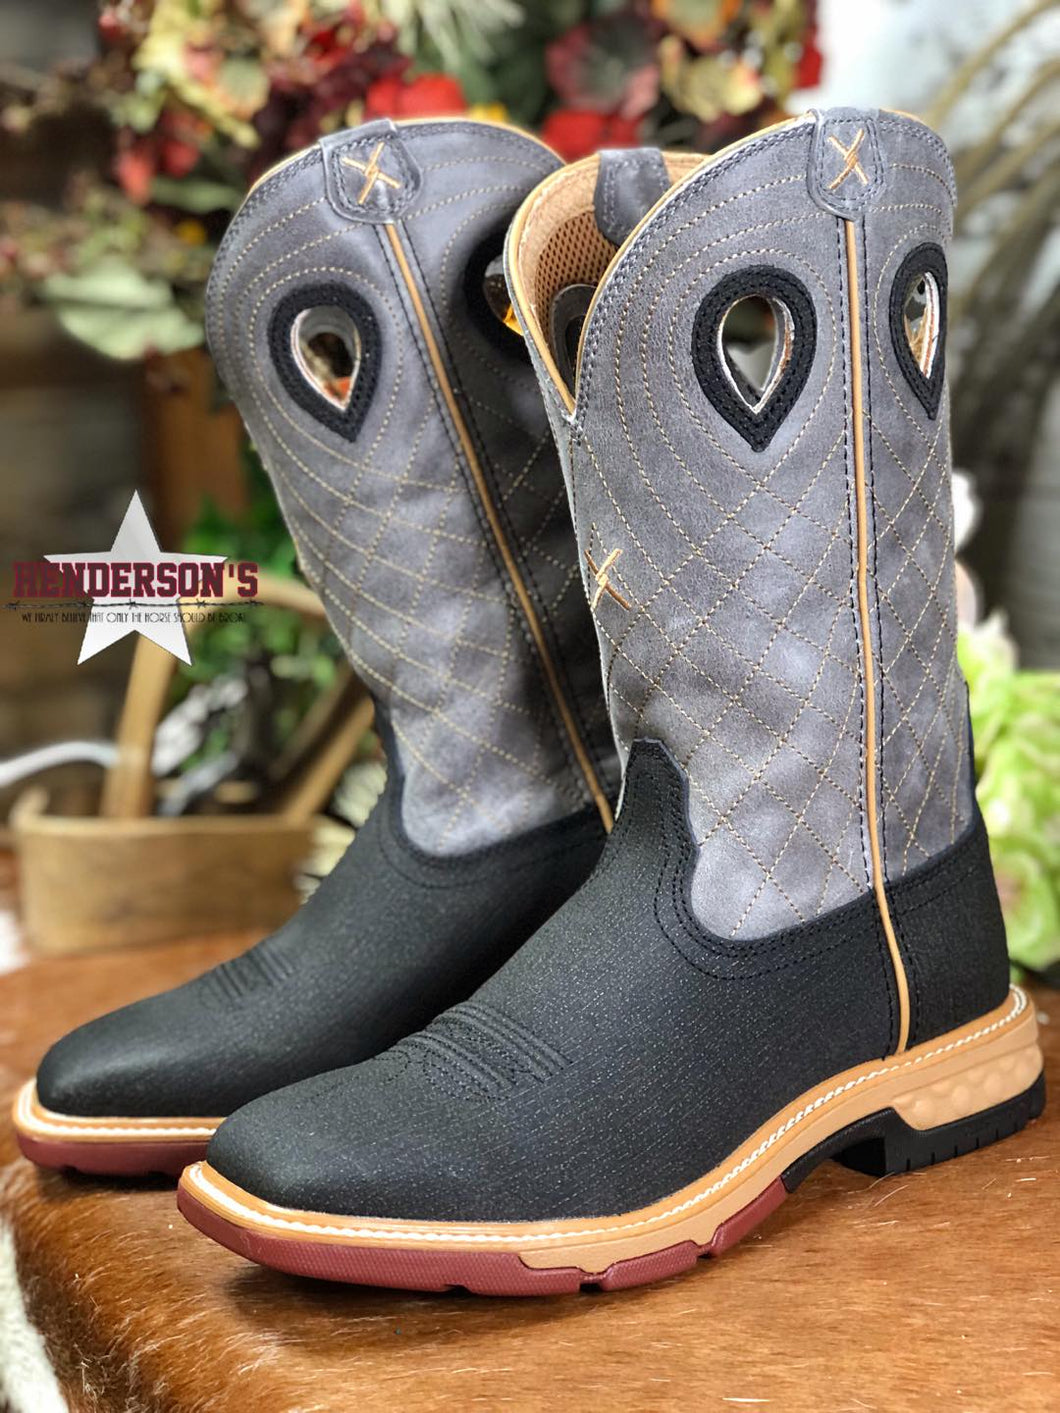 Western Work Boots by Twisted X - Henderson's Western Store